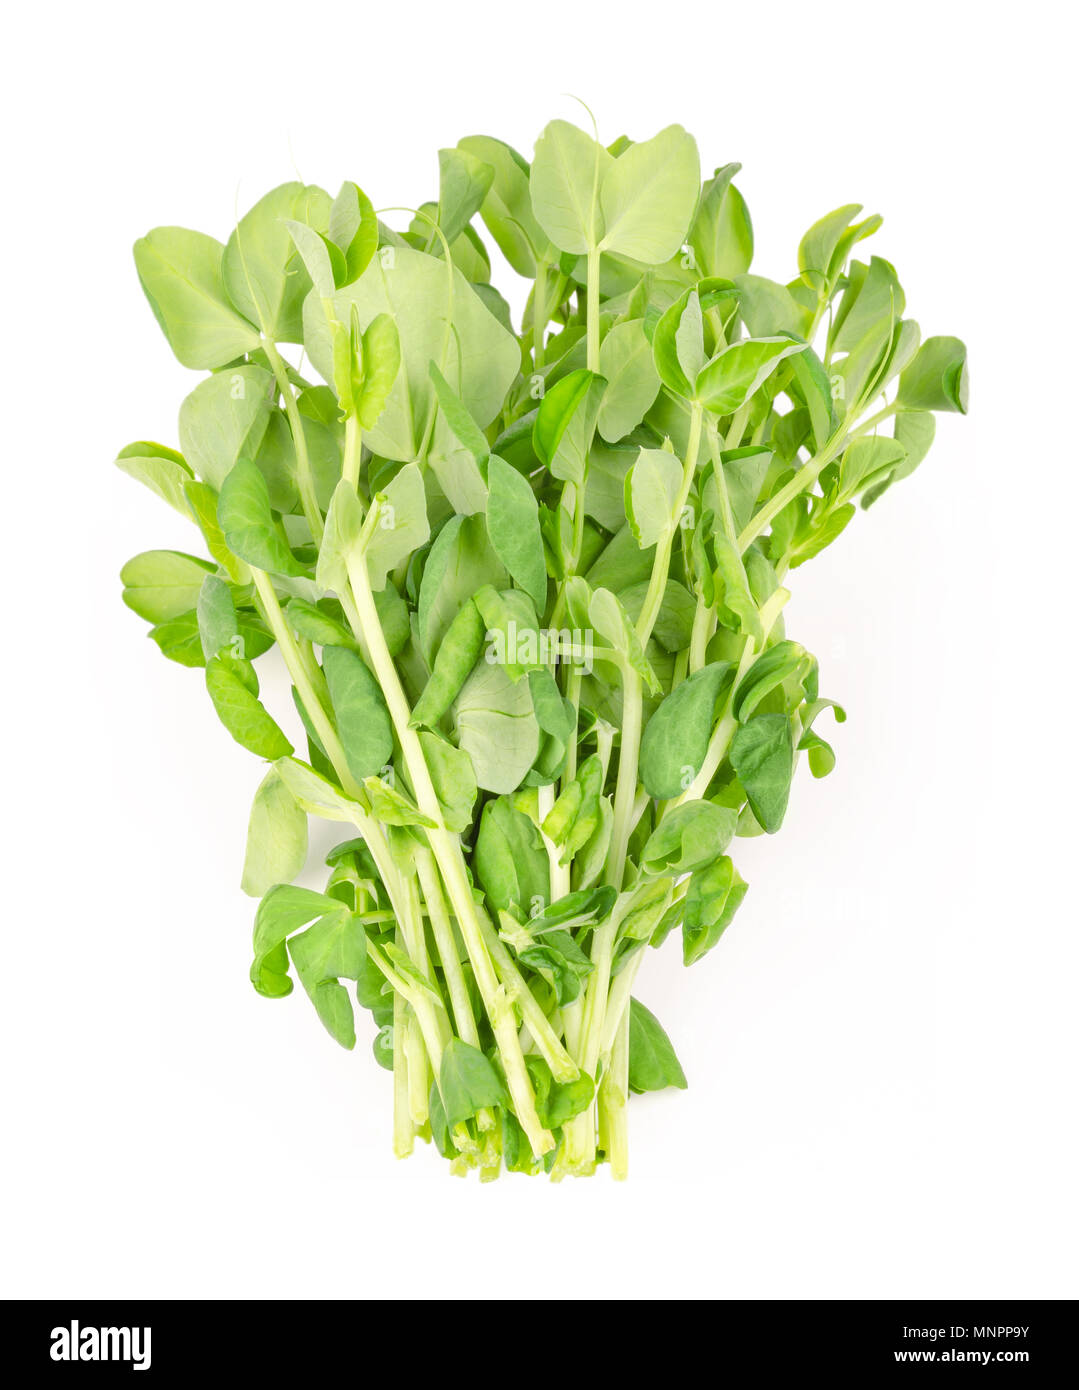 Bunch of snow pea microgreen on white background. Shoots of Pisum sativum, also called mangetout or sugar peas. Young plants, seedlings and sprouts. Stock Photo